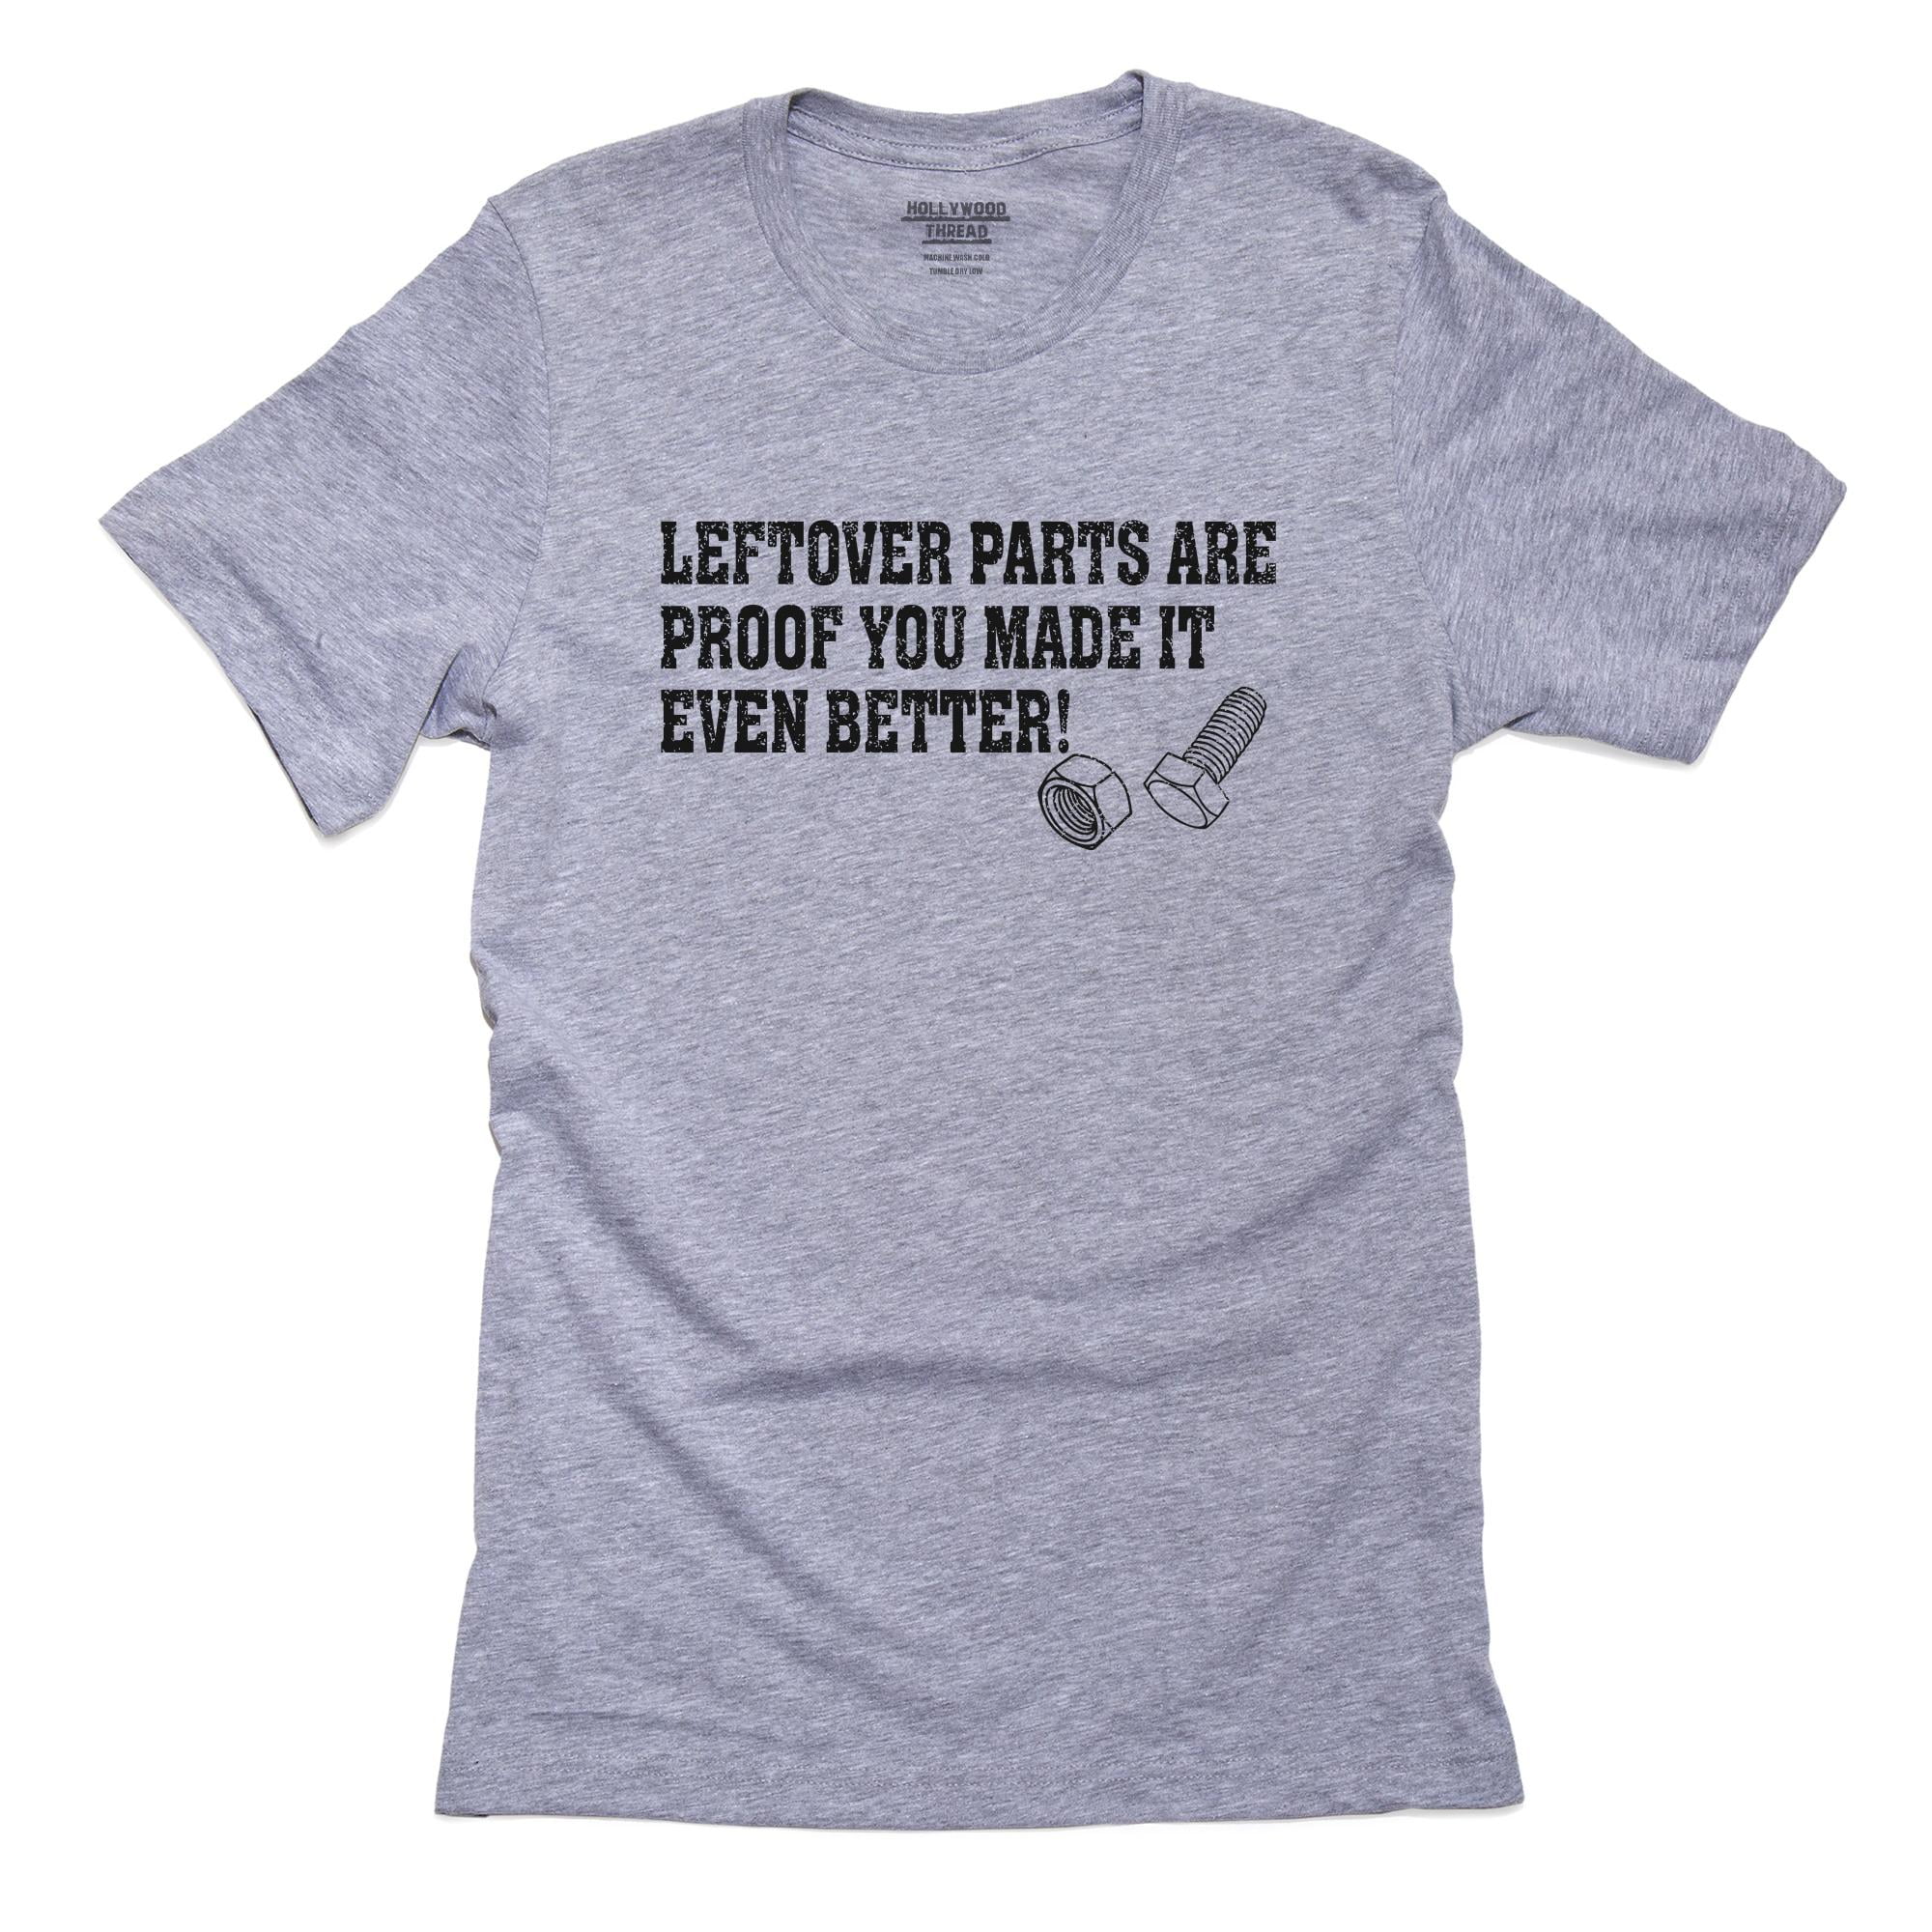 Leftover Parts Are Proof You Made It Even Better! Men's Grey T-Shirt 